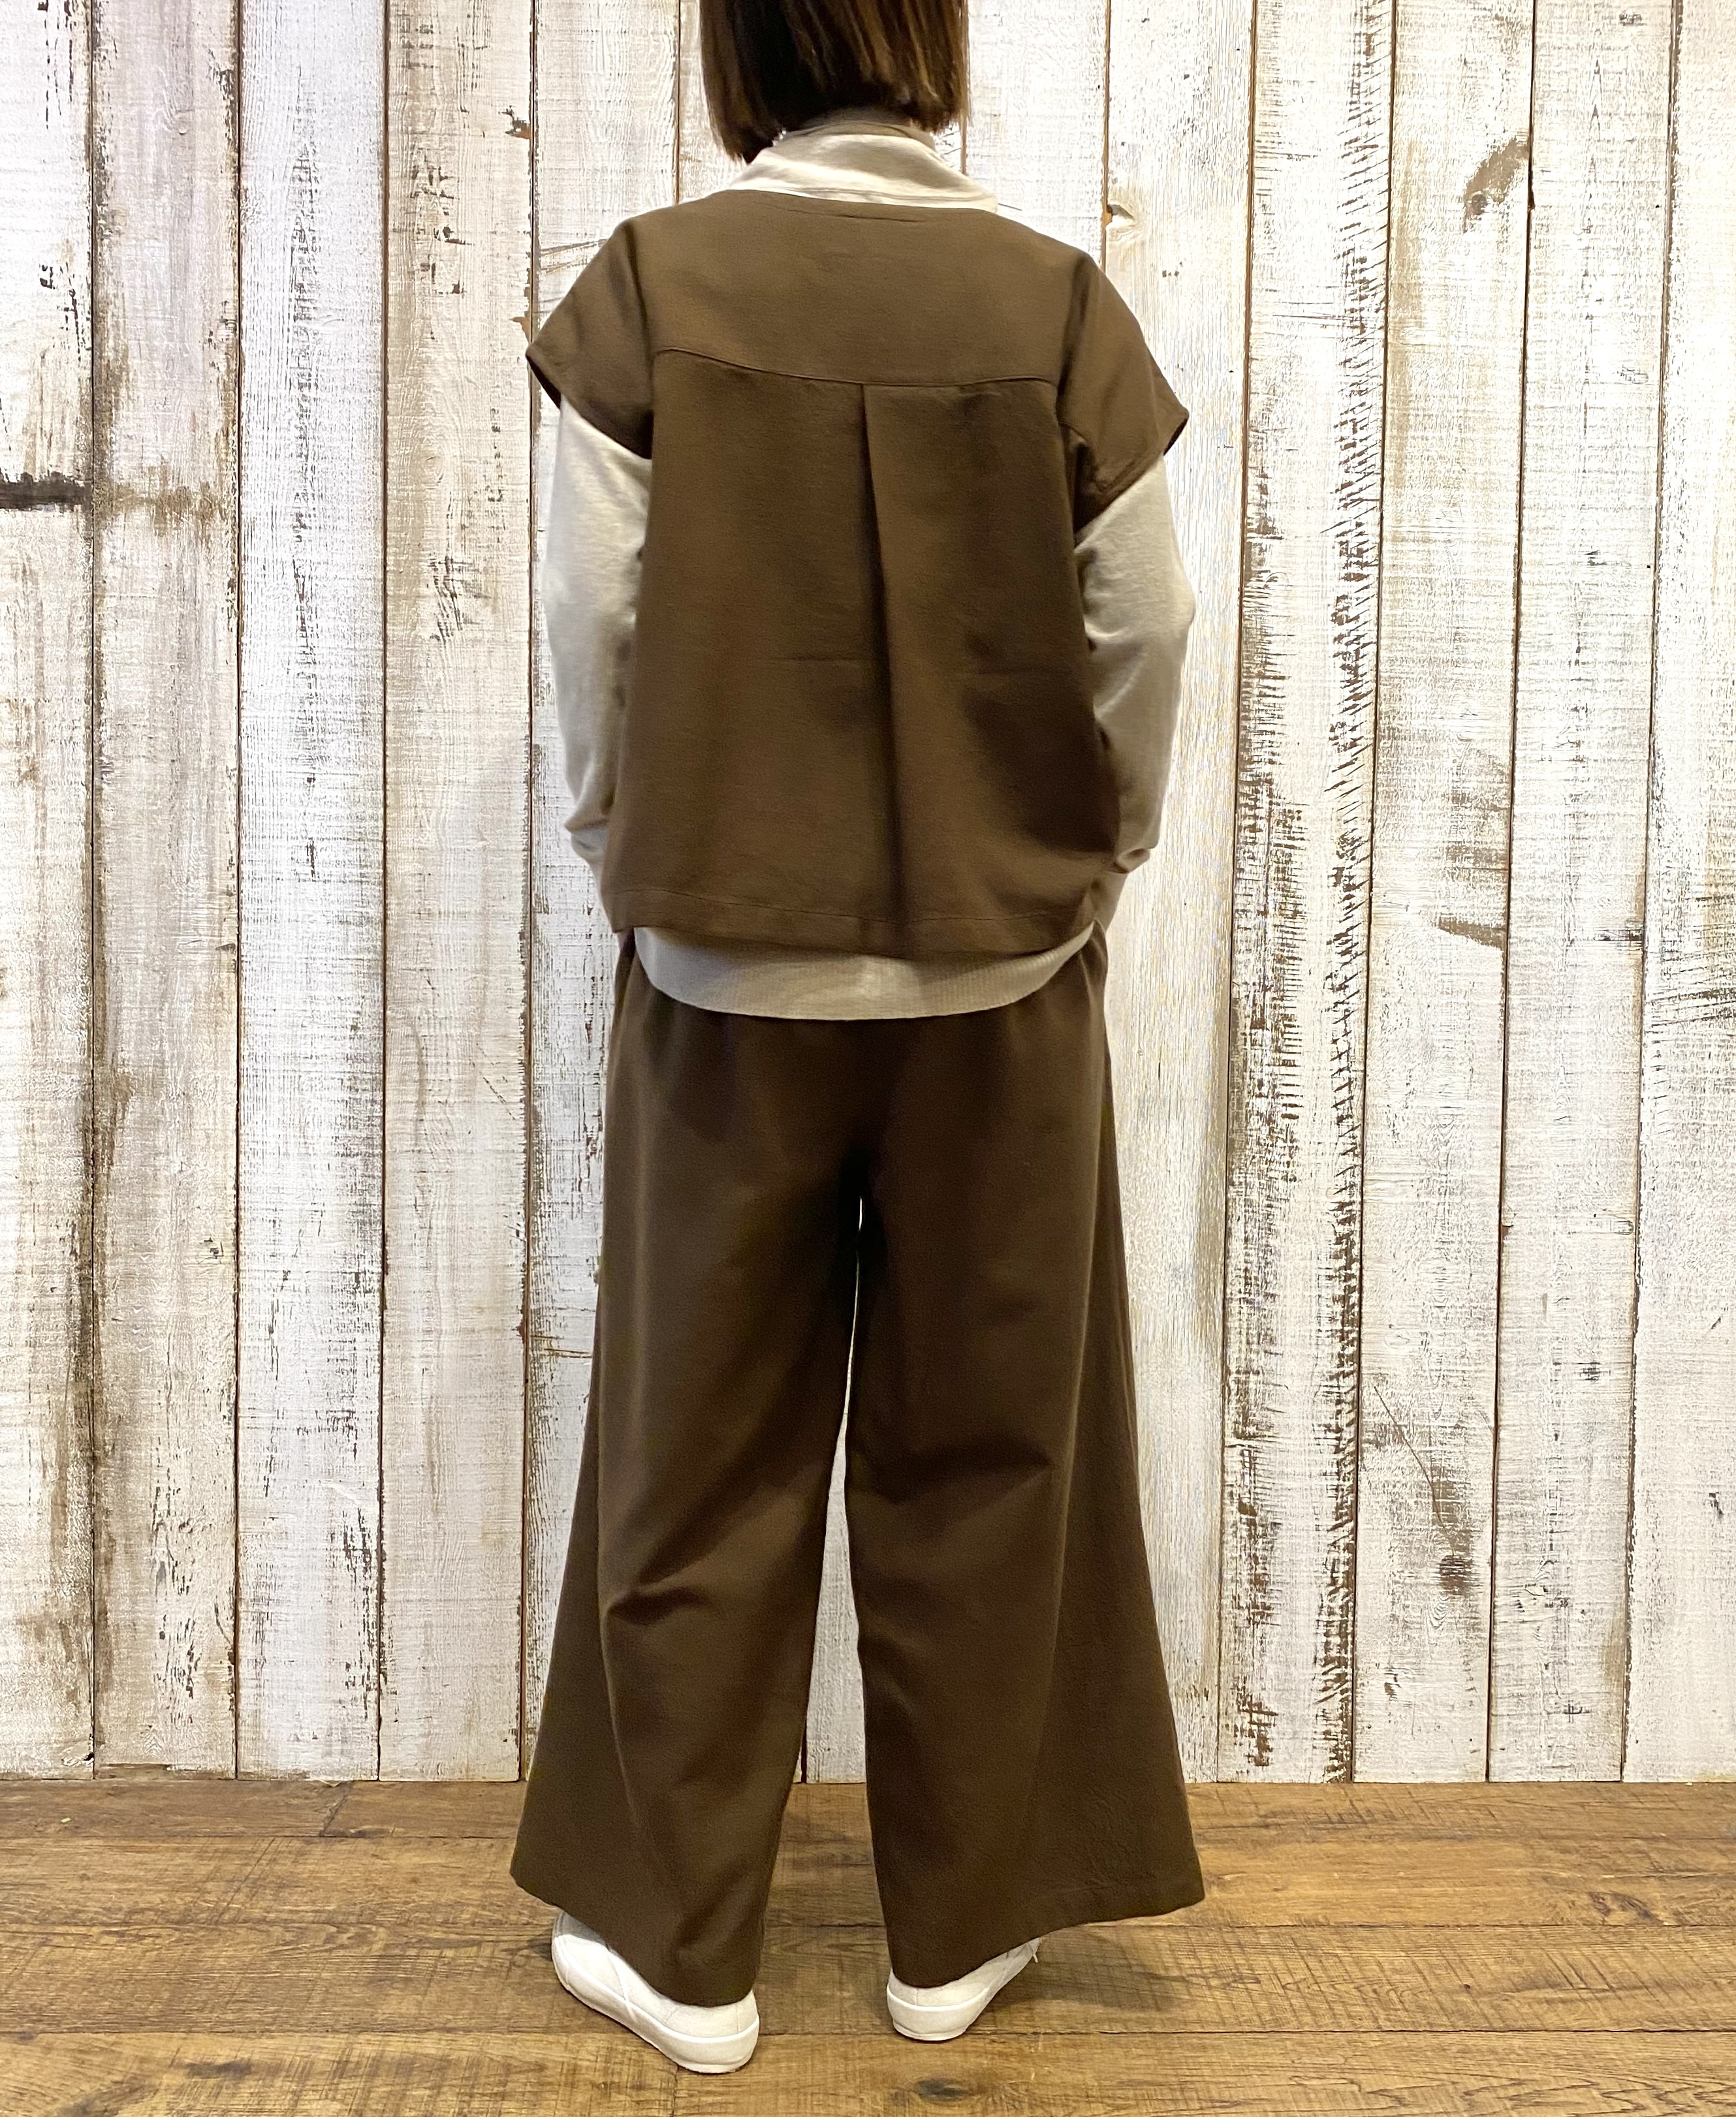 INSL23732 (ブラウス) COTTON WOOL TWILL WEAVE PLAIN FRENCH/SL BACK SIDE PLEATS PULLOVER